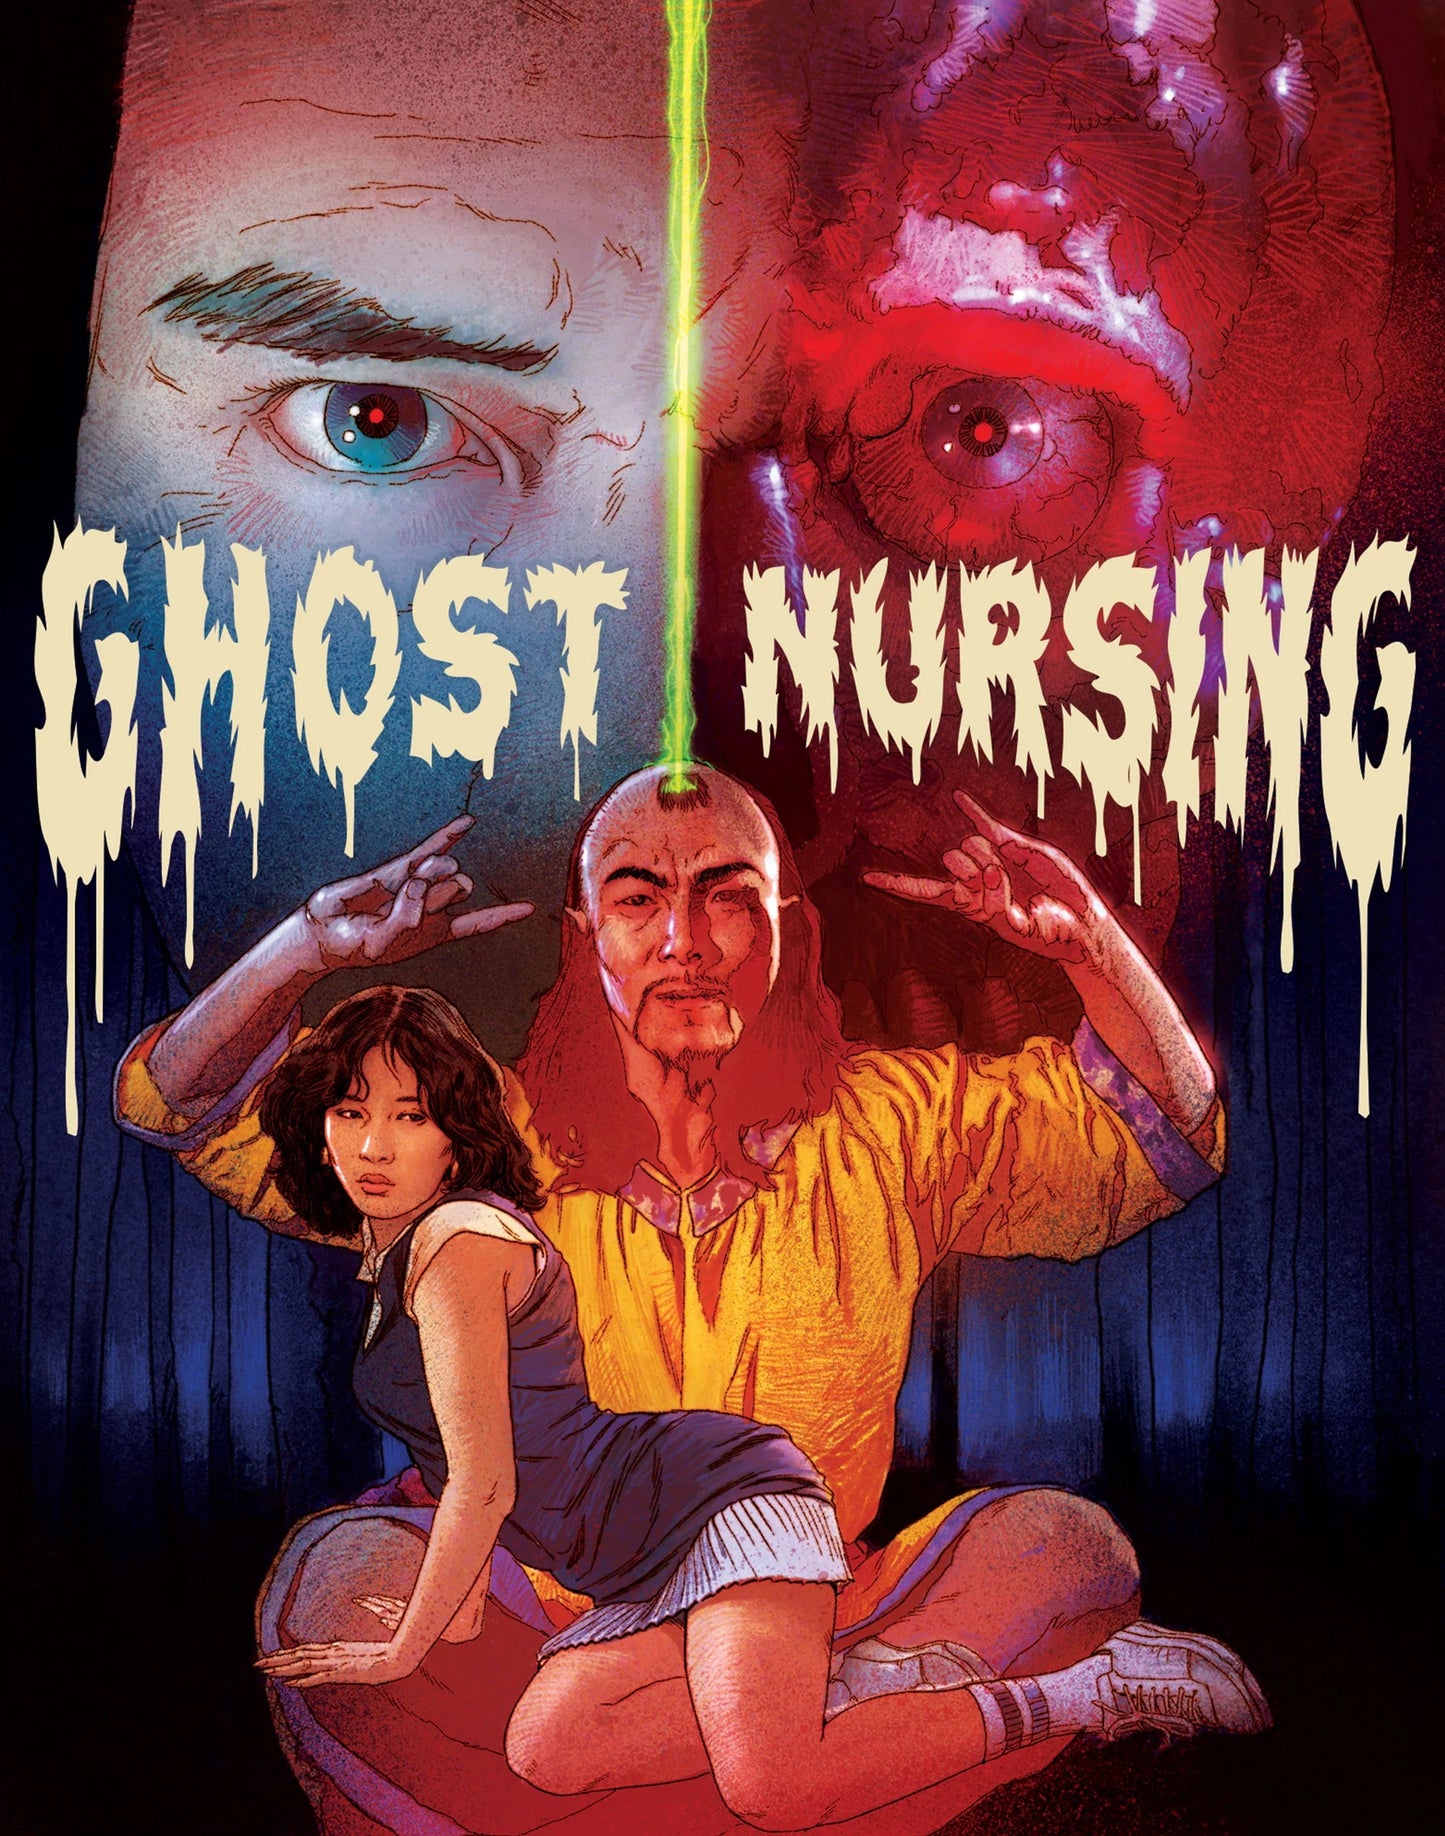 Ghost Nursing Limited Edition Vinegar Syndrome Blu-Ray [NEW] [SLIPCOVER]